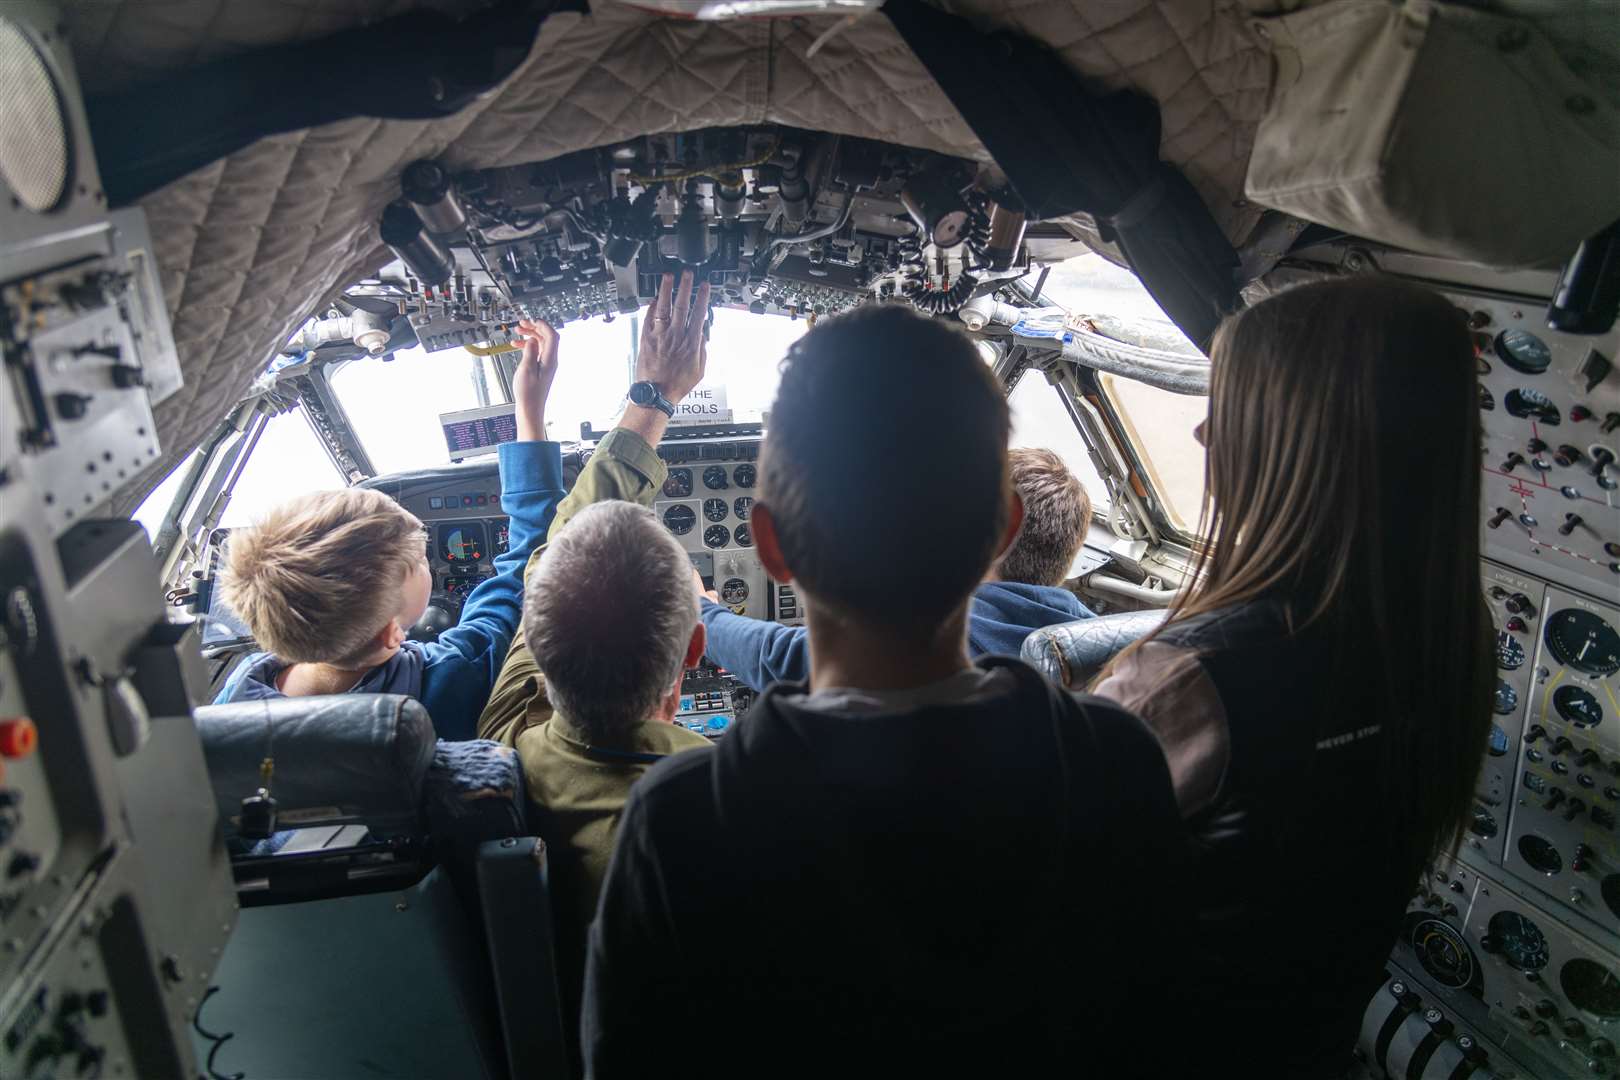 Attendees inside the cockpit of a Hawker Siddeley Nimrod.